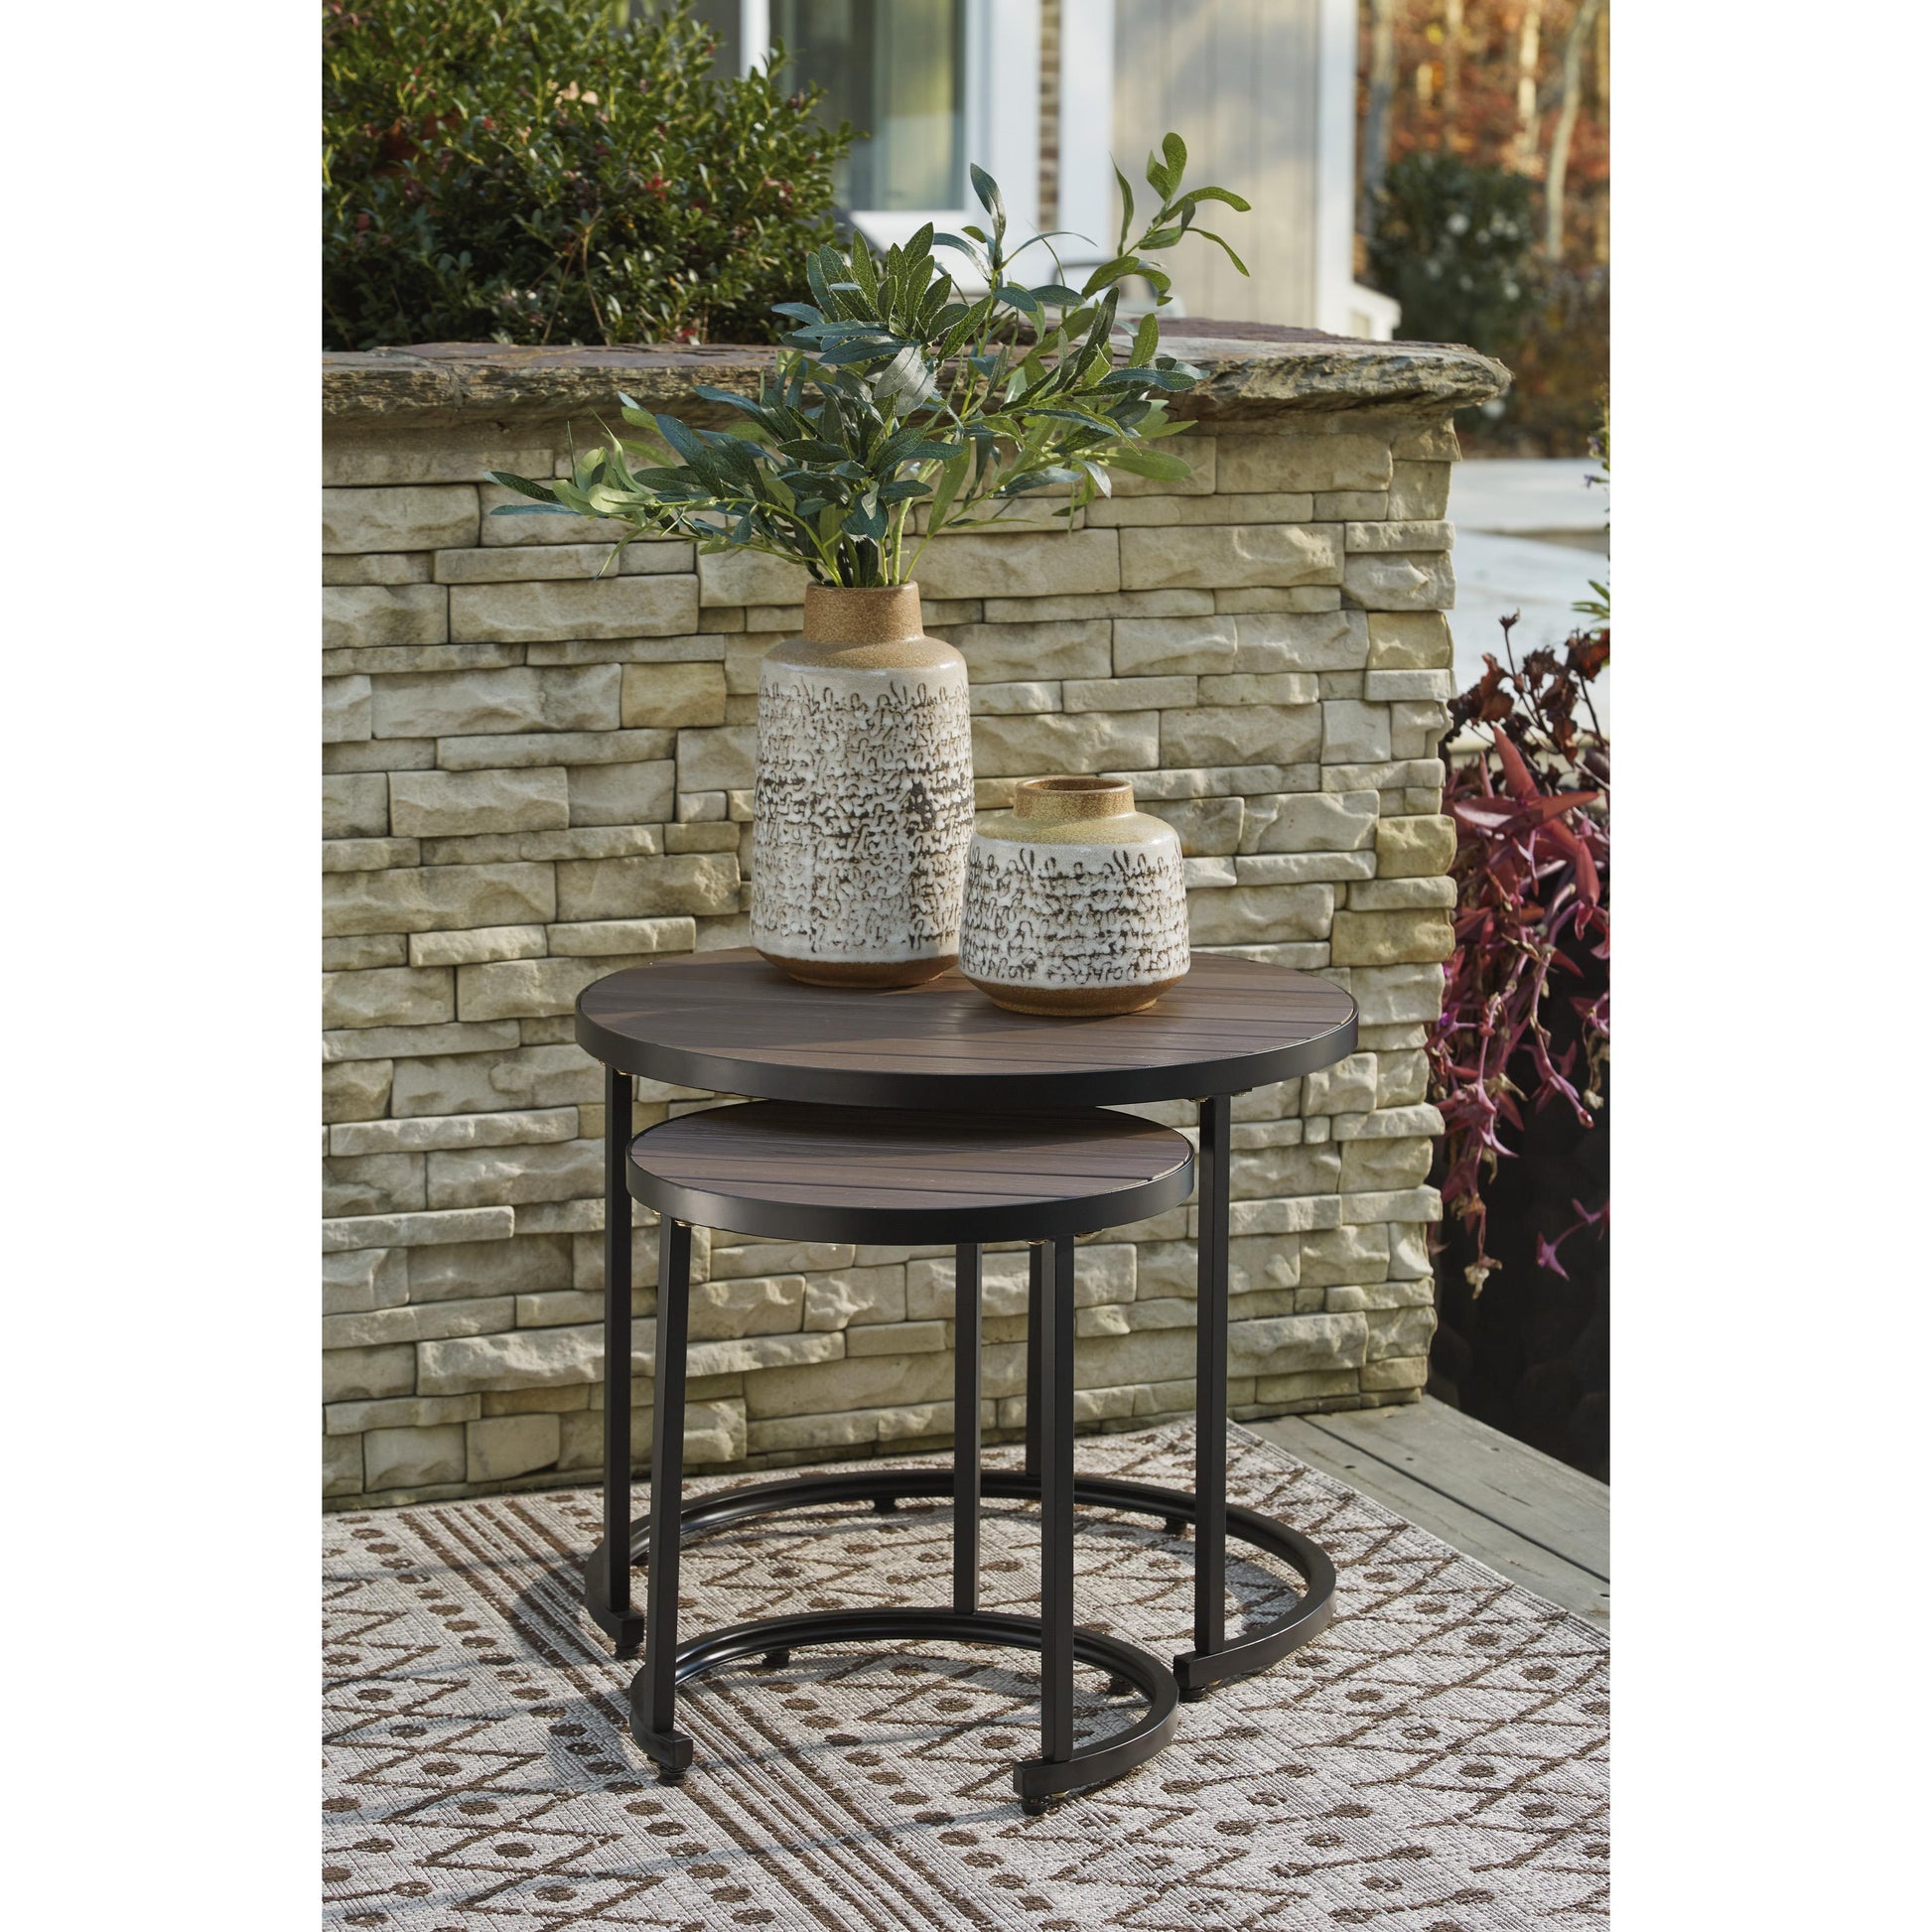 Signature Design by Ashley Outdoor Tables Nesting Tables P020-716 IMAGE 5